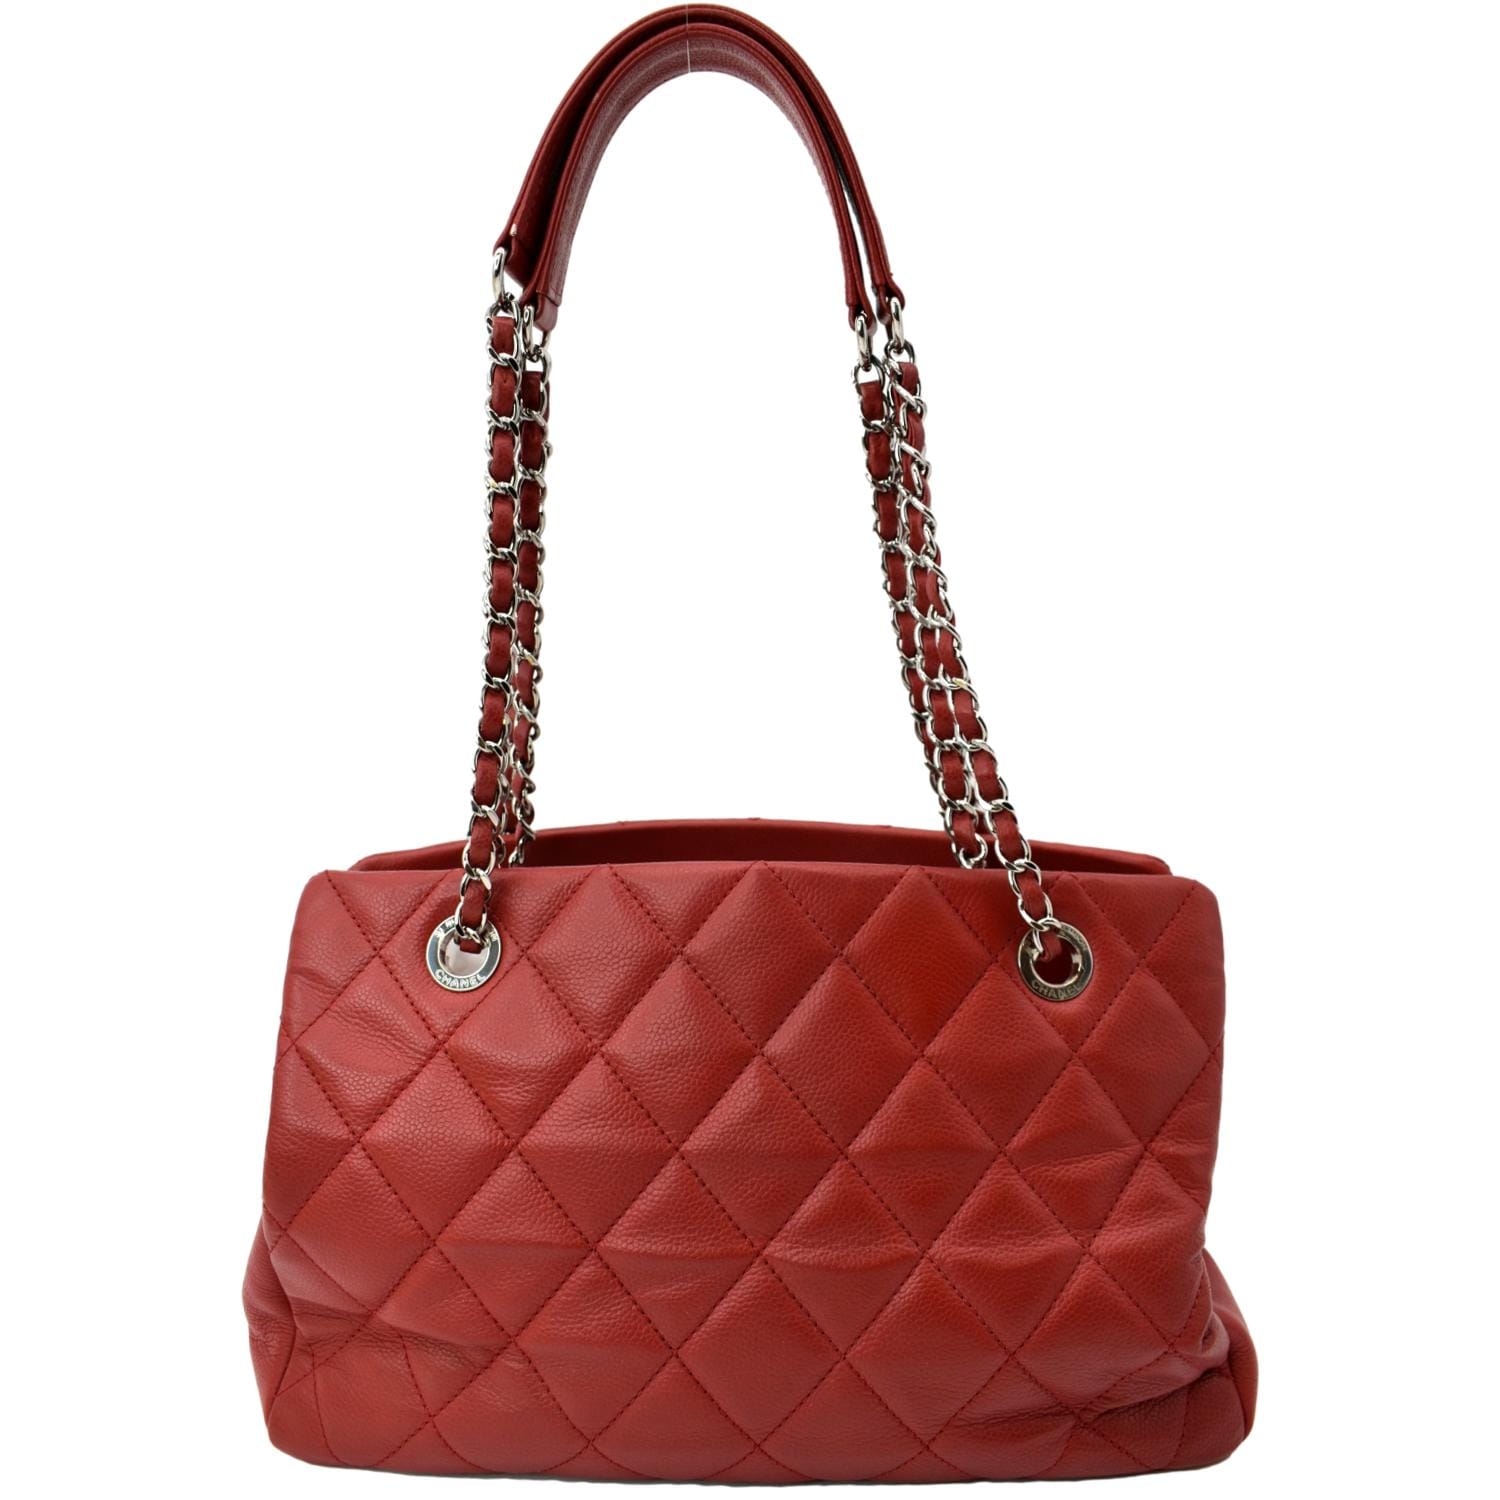 Chanel Dark Red Caviar Leather Timeless CC Soft Shopping Tote Bag